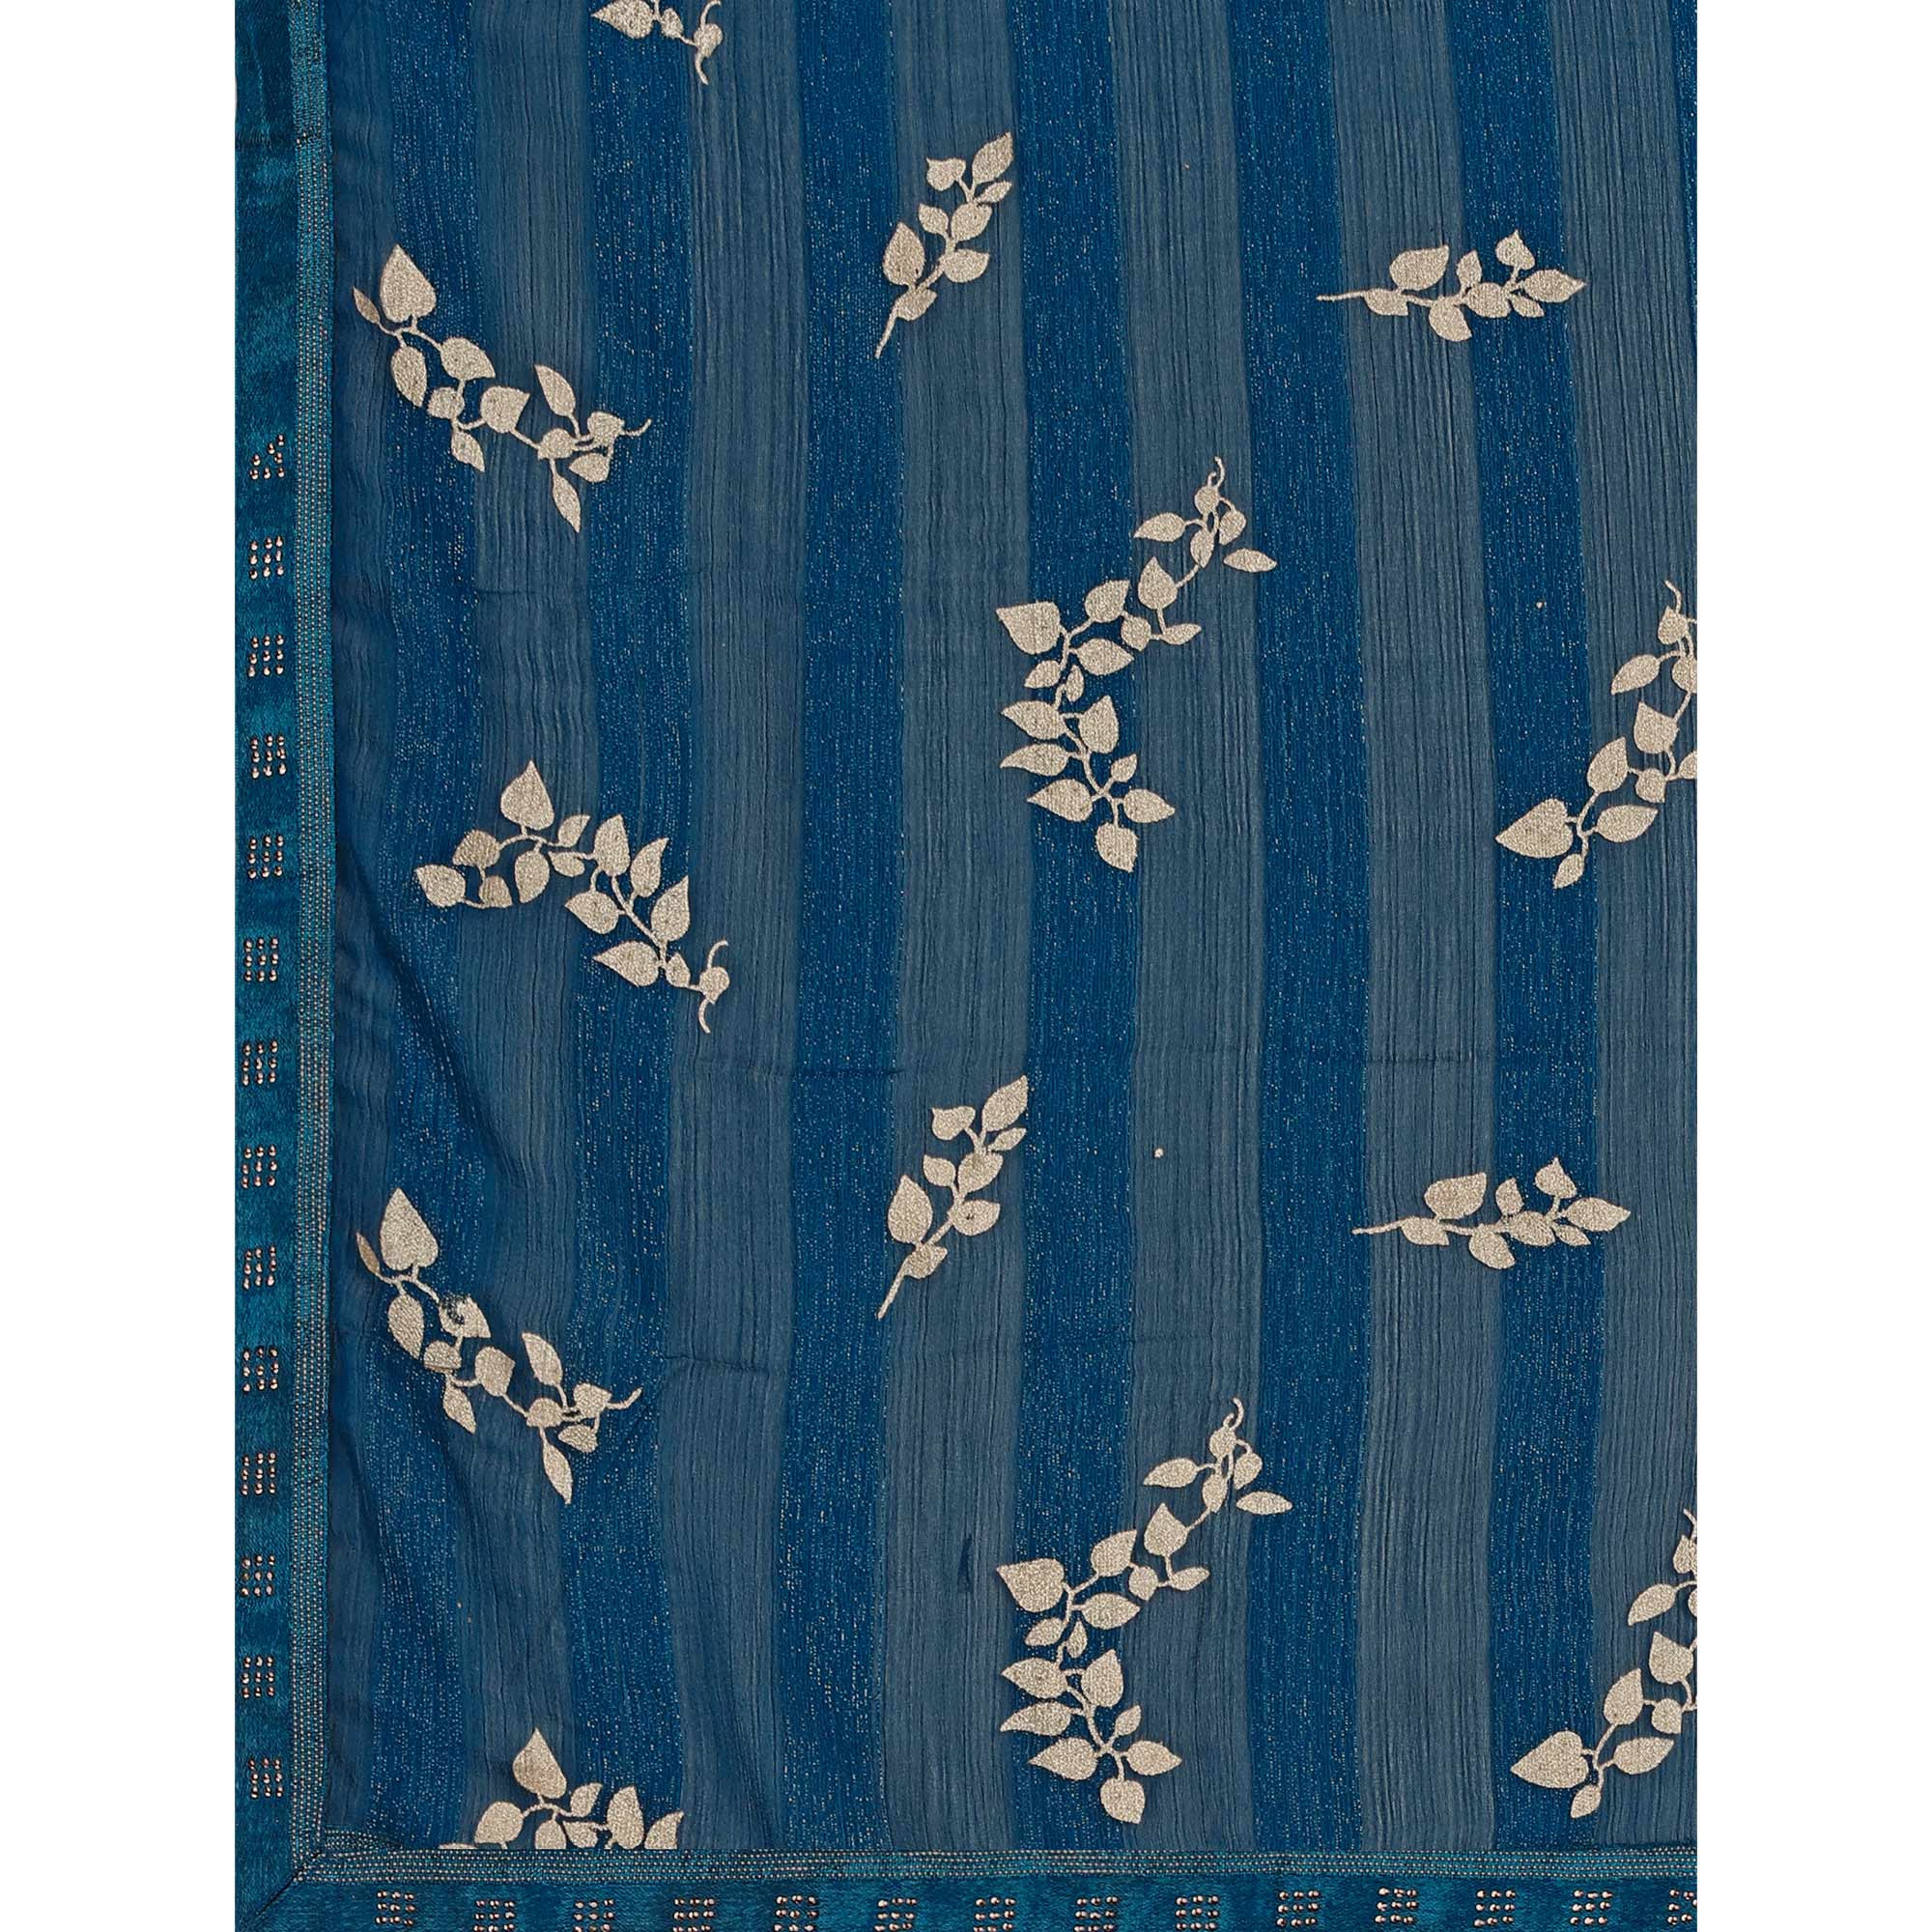 Blue Foil Printed Chiffon Saree With Lace Border